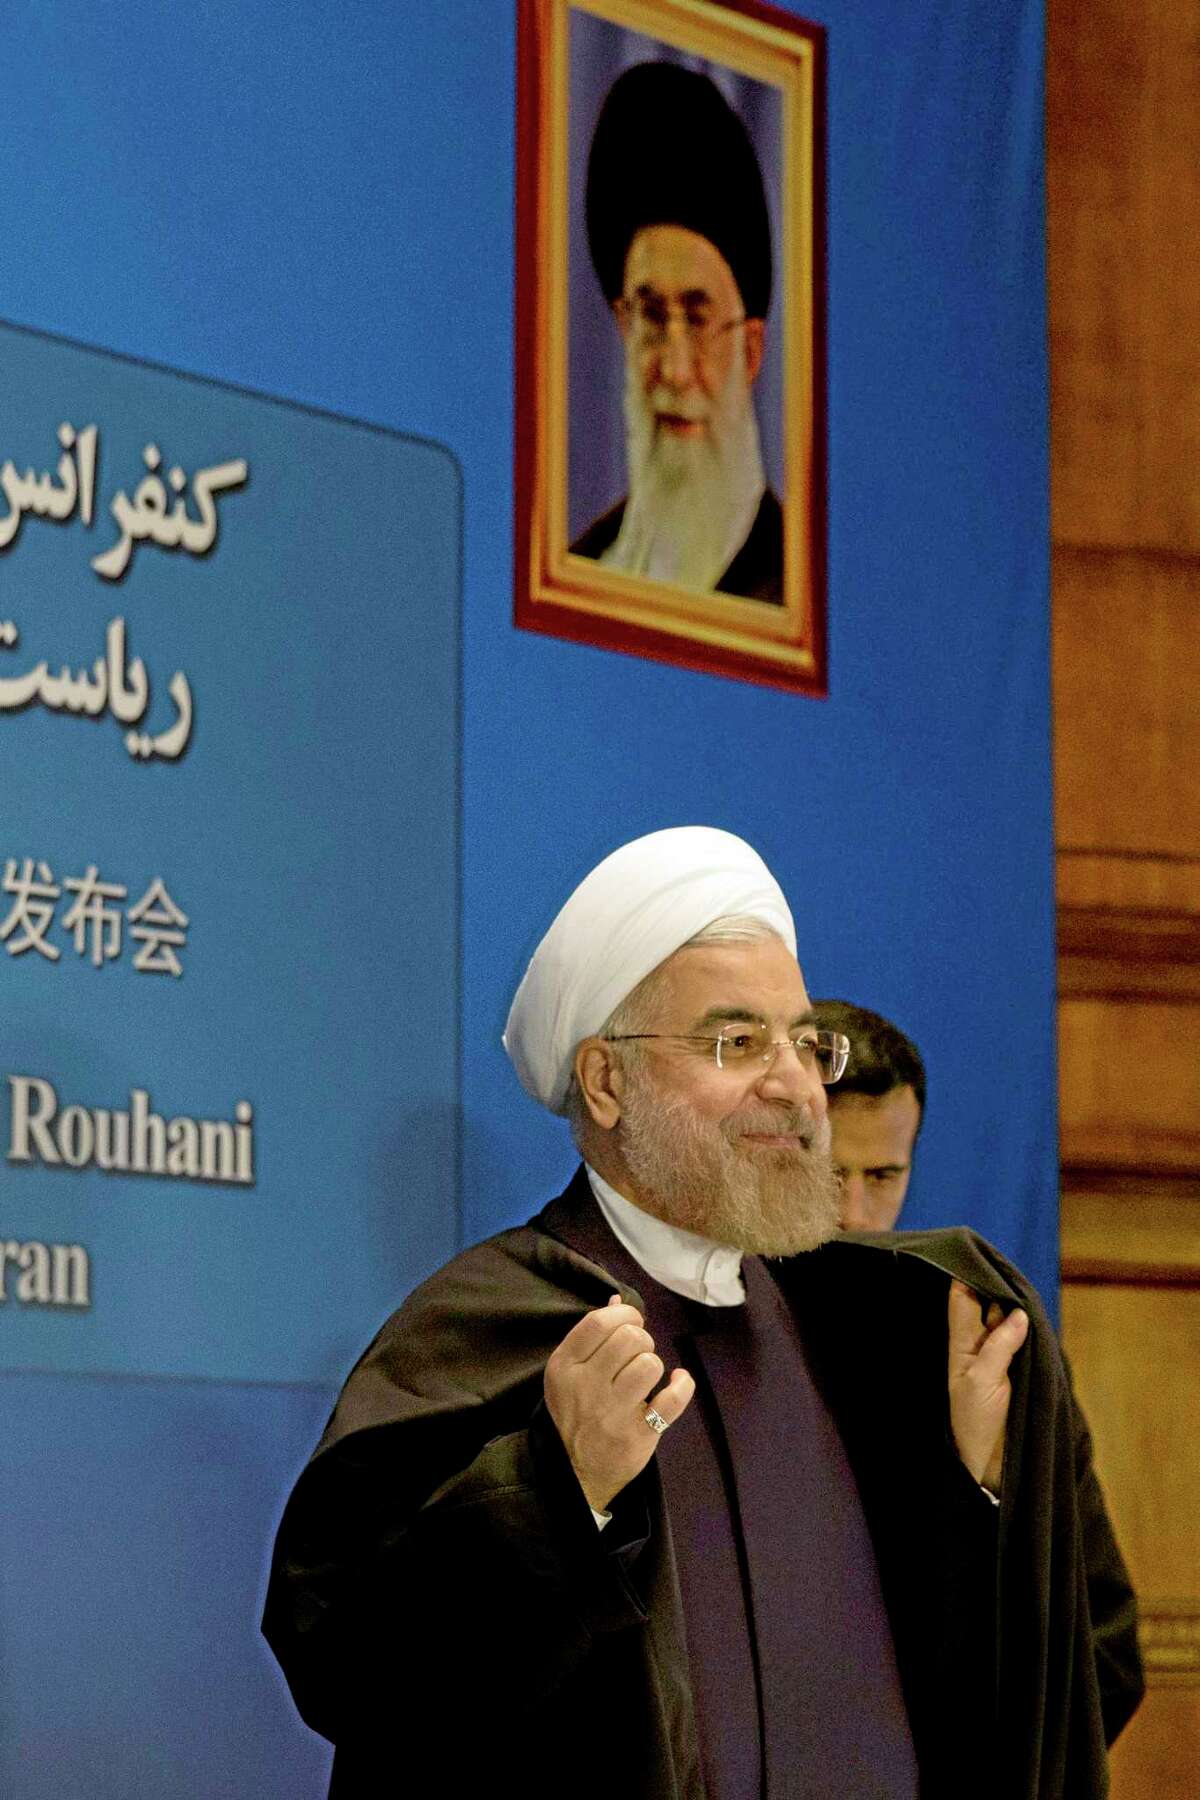 Iranian President Hassan Rouhani prepares to leave after a press conference near a portrait of Iranian Supreme Leader Ayatollah Ali Khamenei at a hotel in Shanghai, China, Thursday, May 22, 2014. Rouhani says an agreement on curbing its nuclear program is "very likely" by July despite a snag in talks last week, but said negotiations might also be extended. (AP Photo/Ng Han Guan)